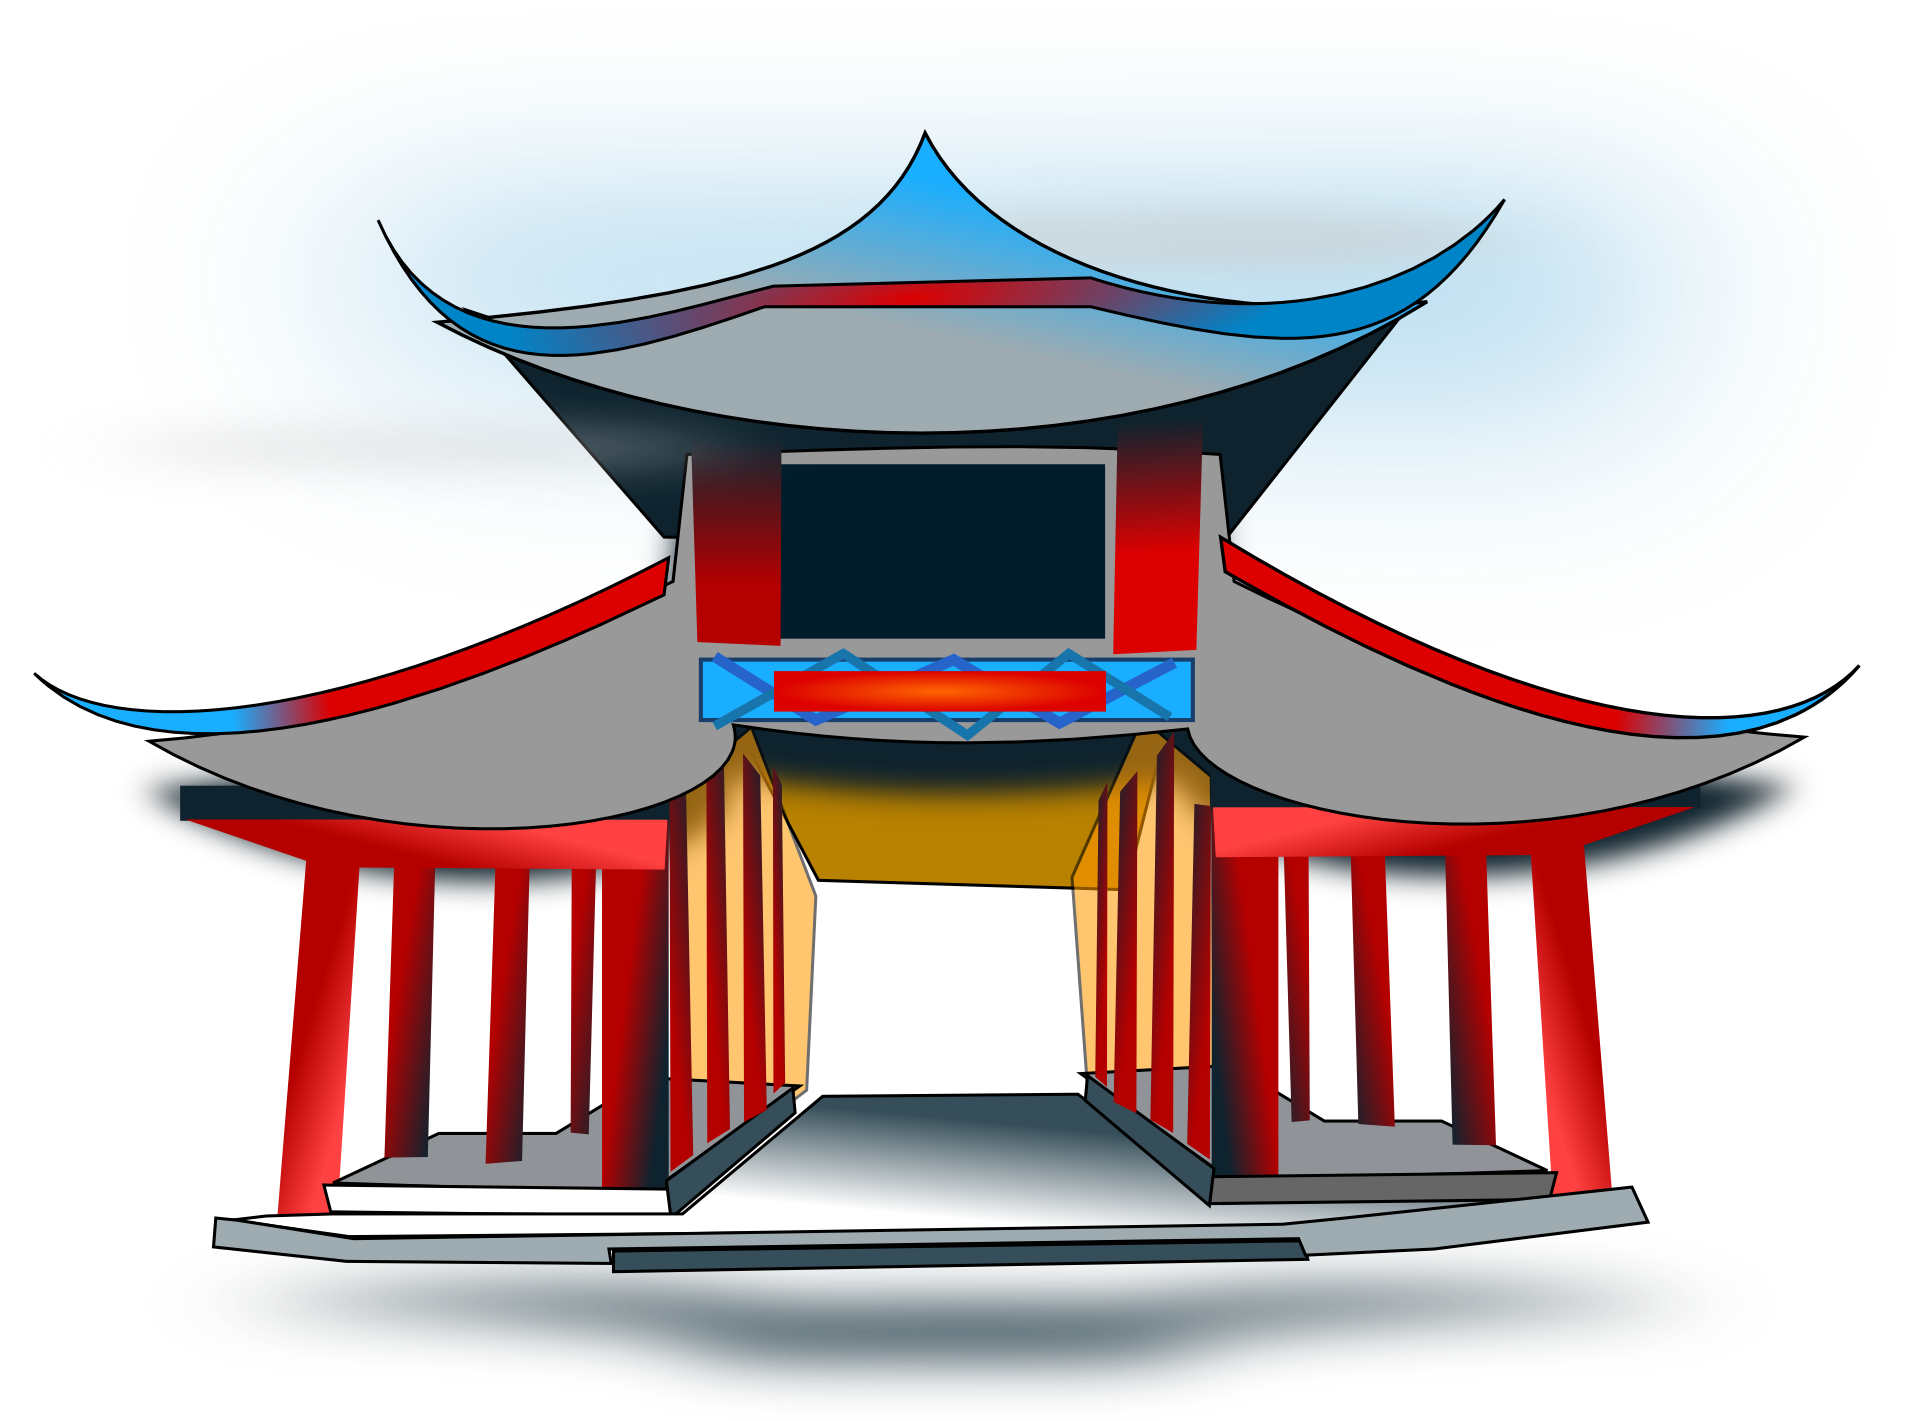 İllustration of Chinese temple free image download